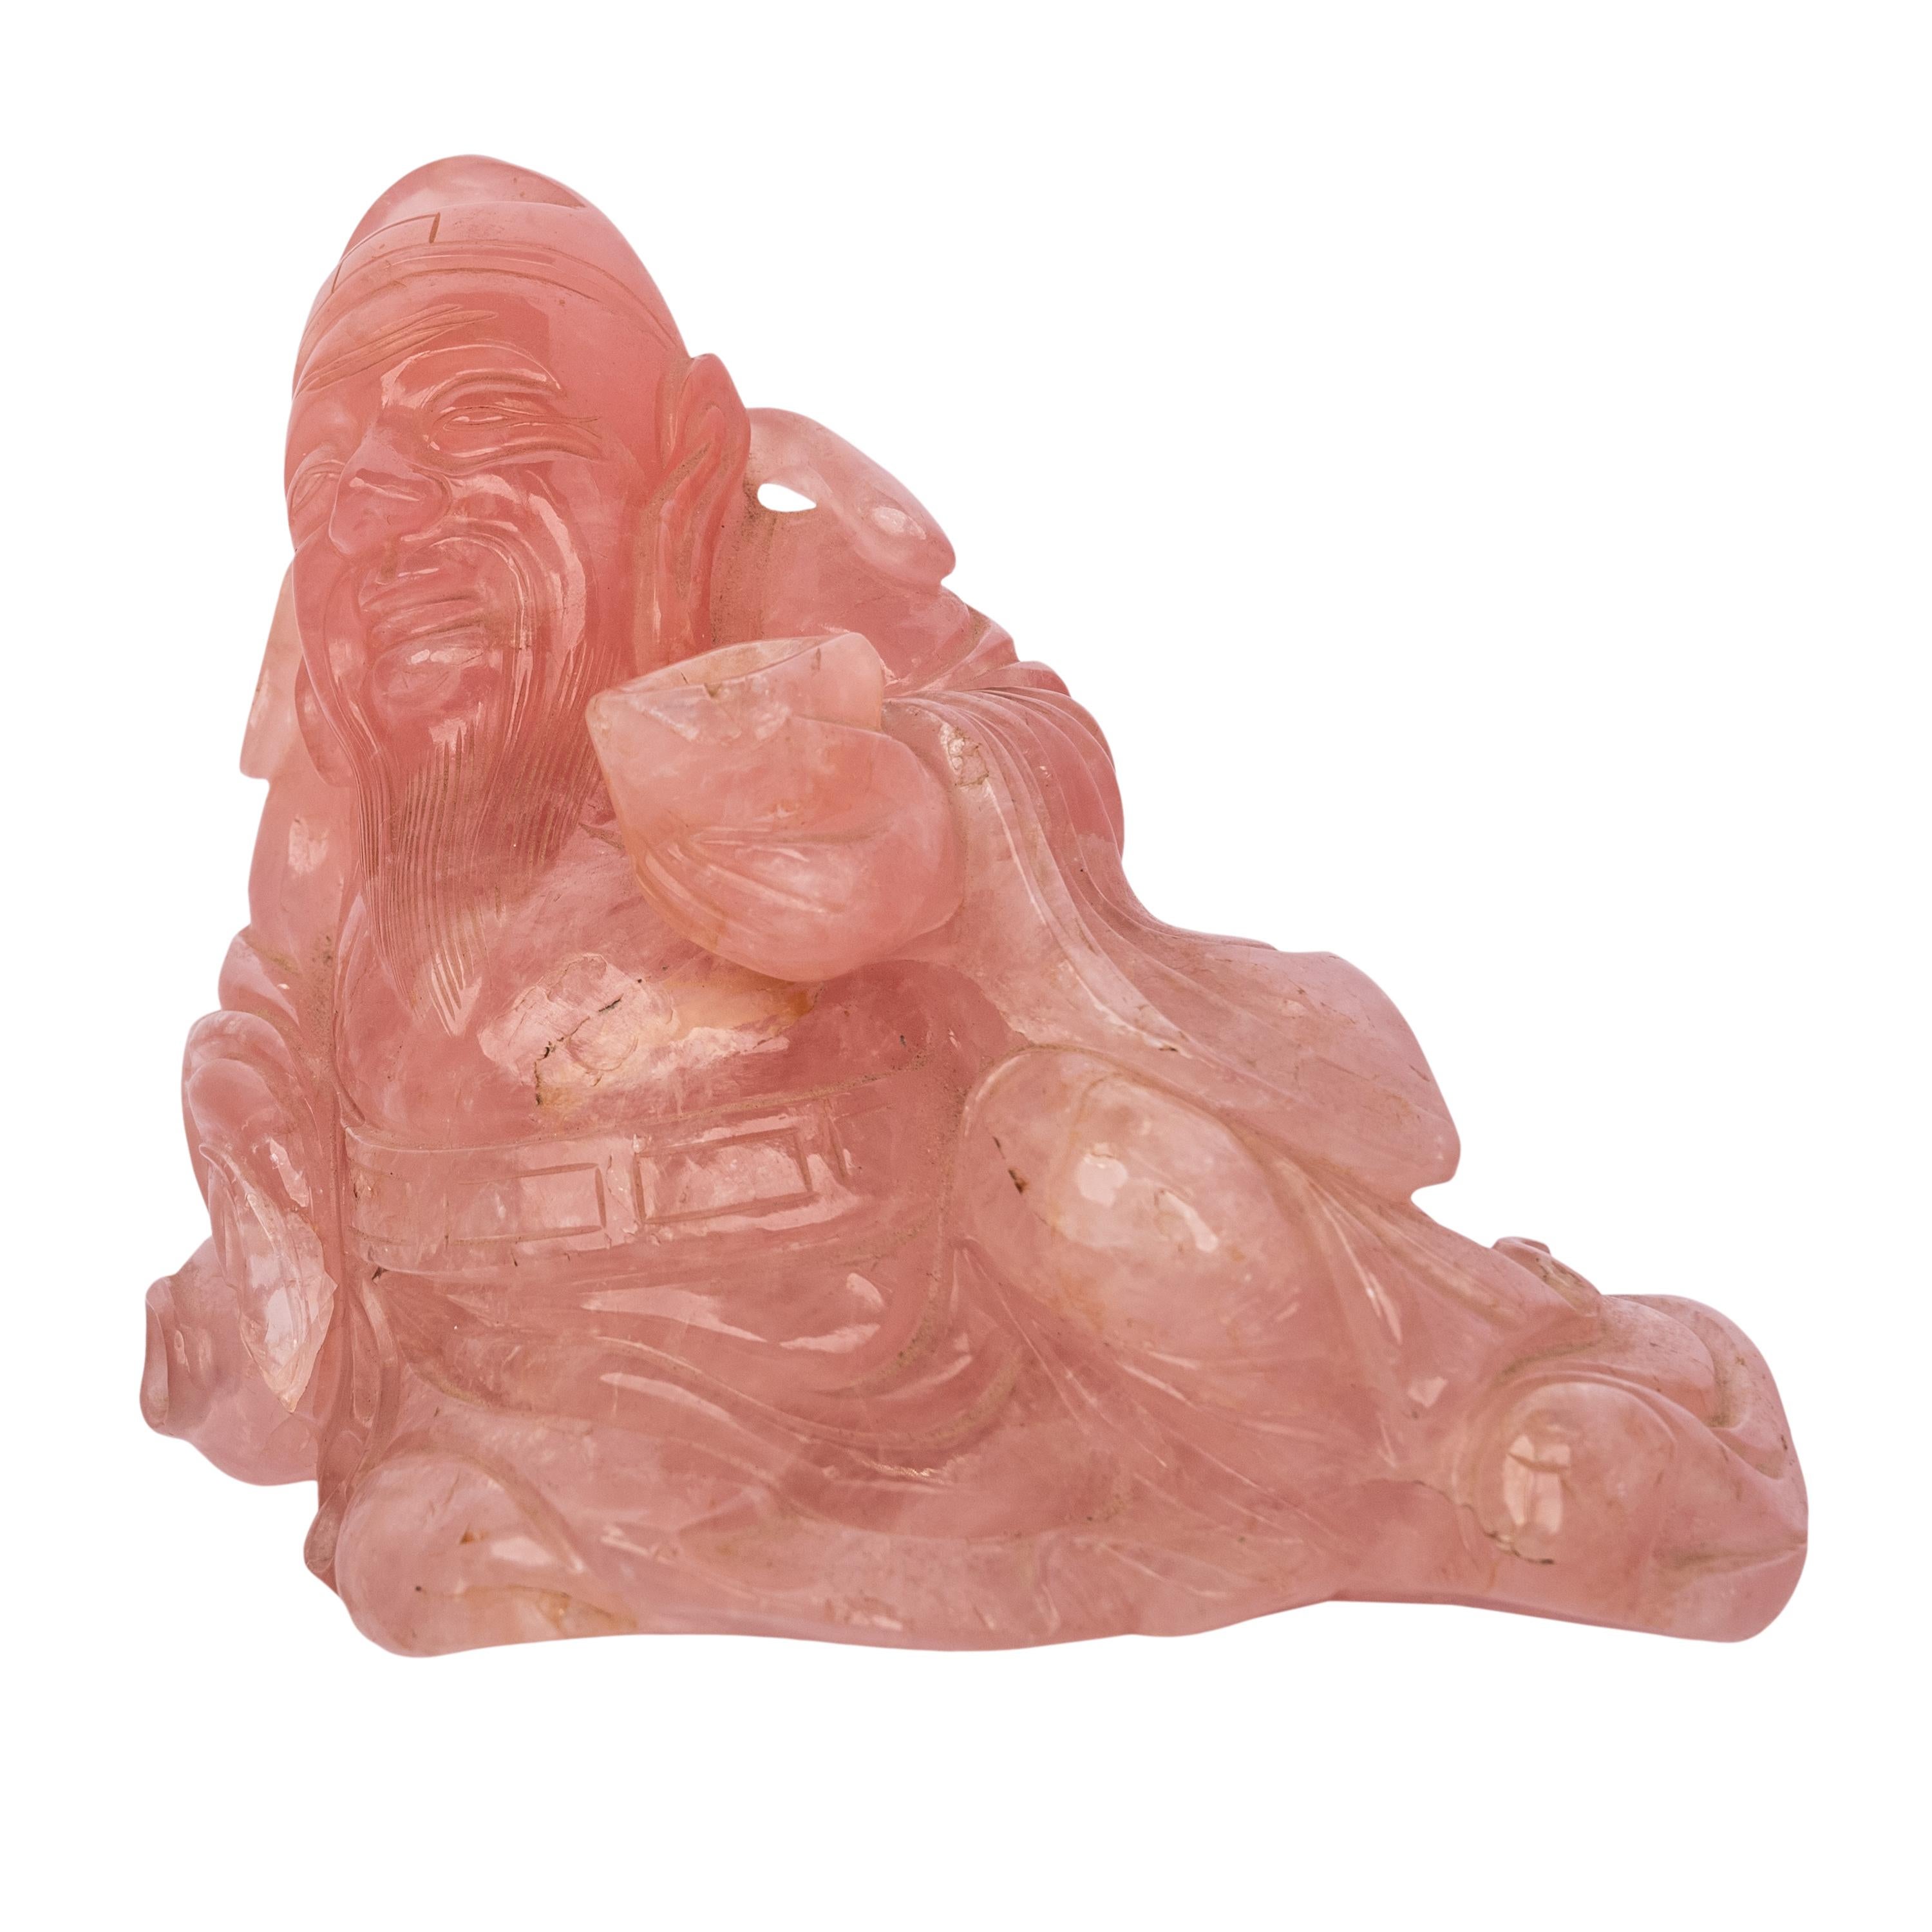 Antique Chinese Qing Dynasty Carved Rose Quartz Hotei Buddha Statue & Stand 1910 For Sale 2